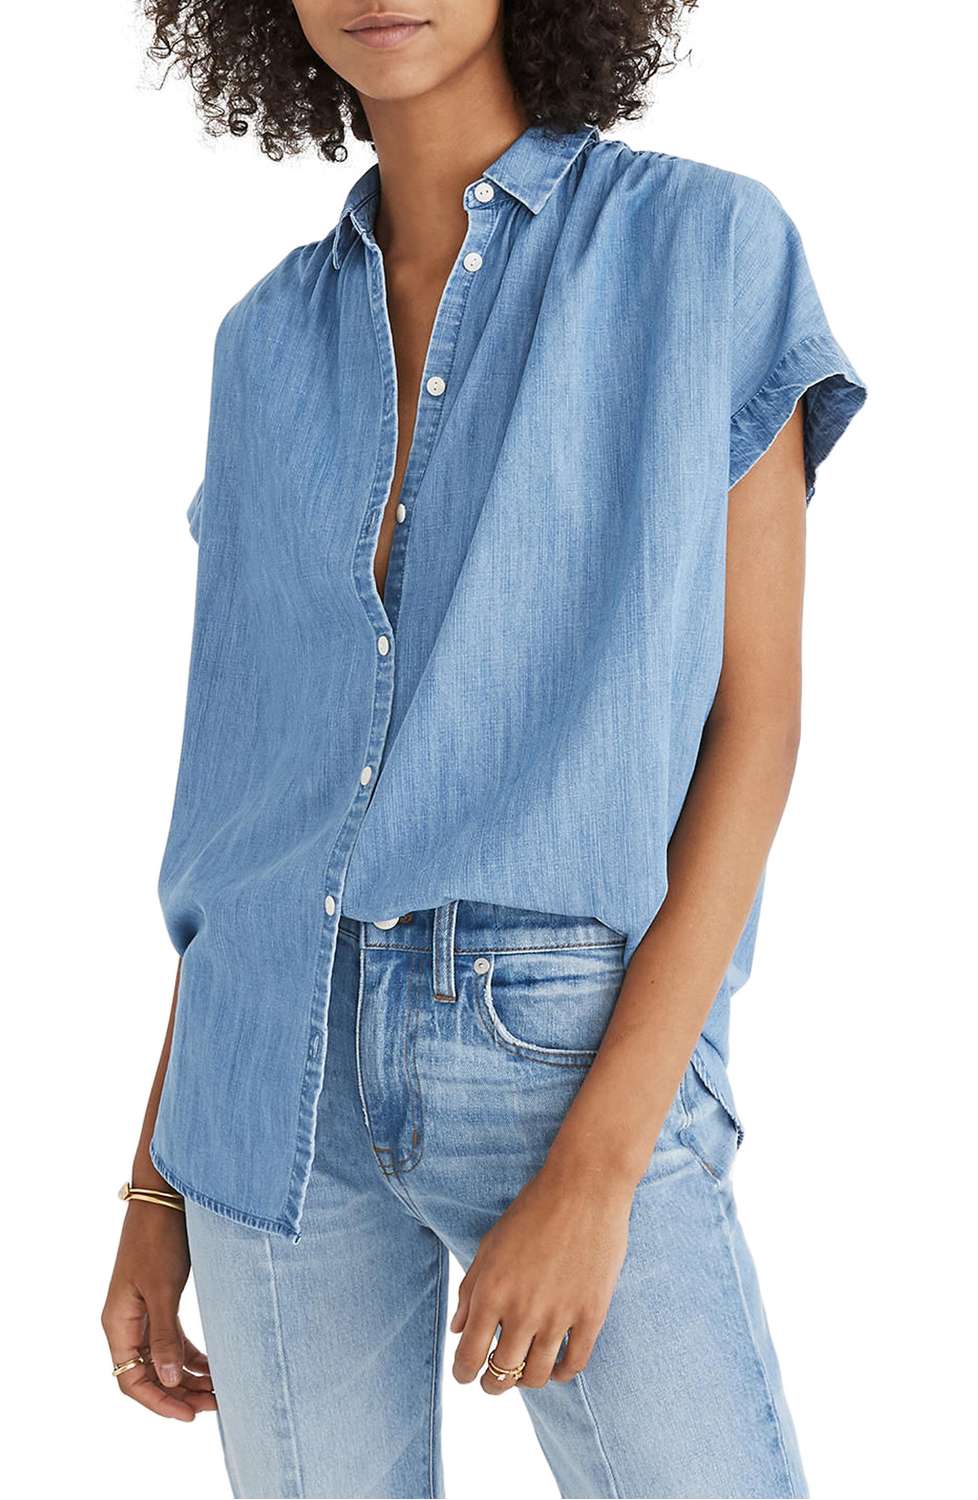 Core Closet Essential: The Chambray Shirt (Trendy Wednesday #155 ...